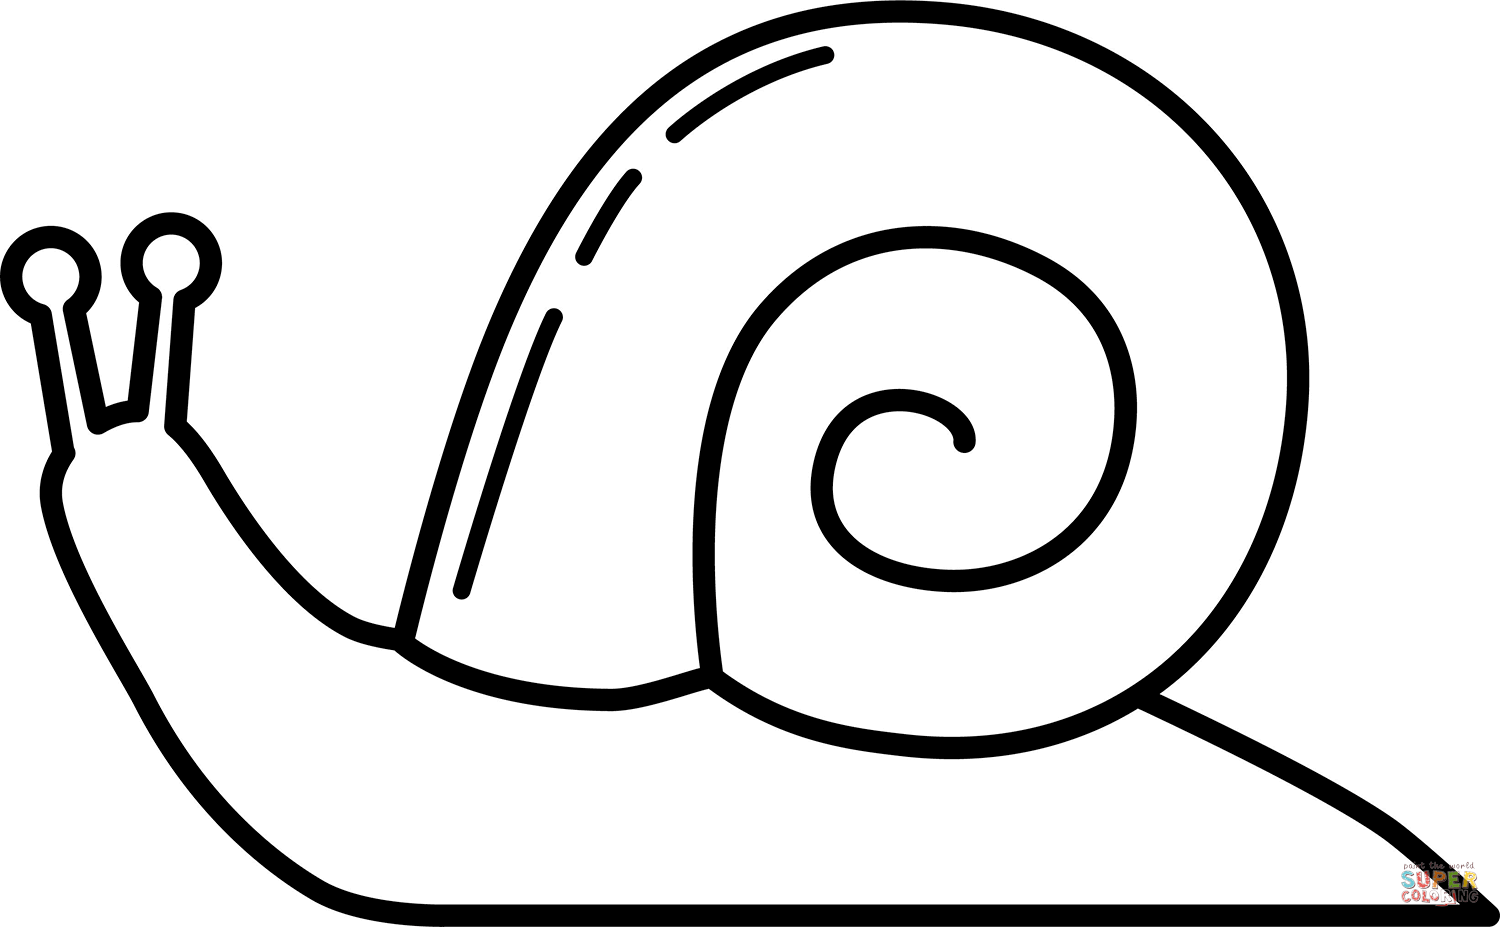 Snail coloring page free printable coloring pages